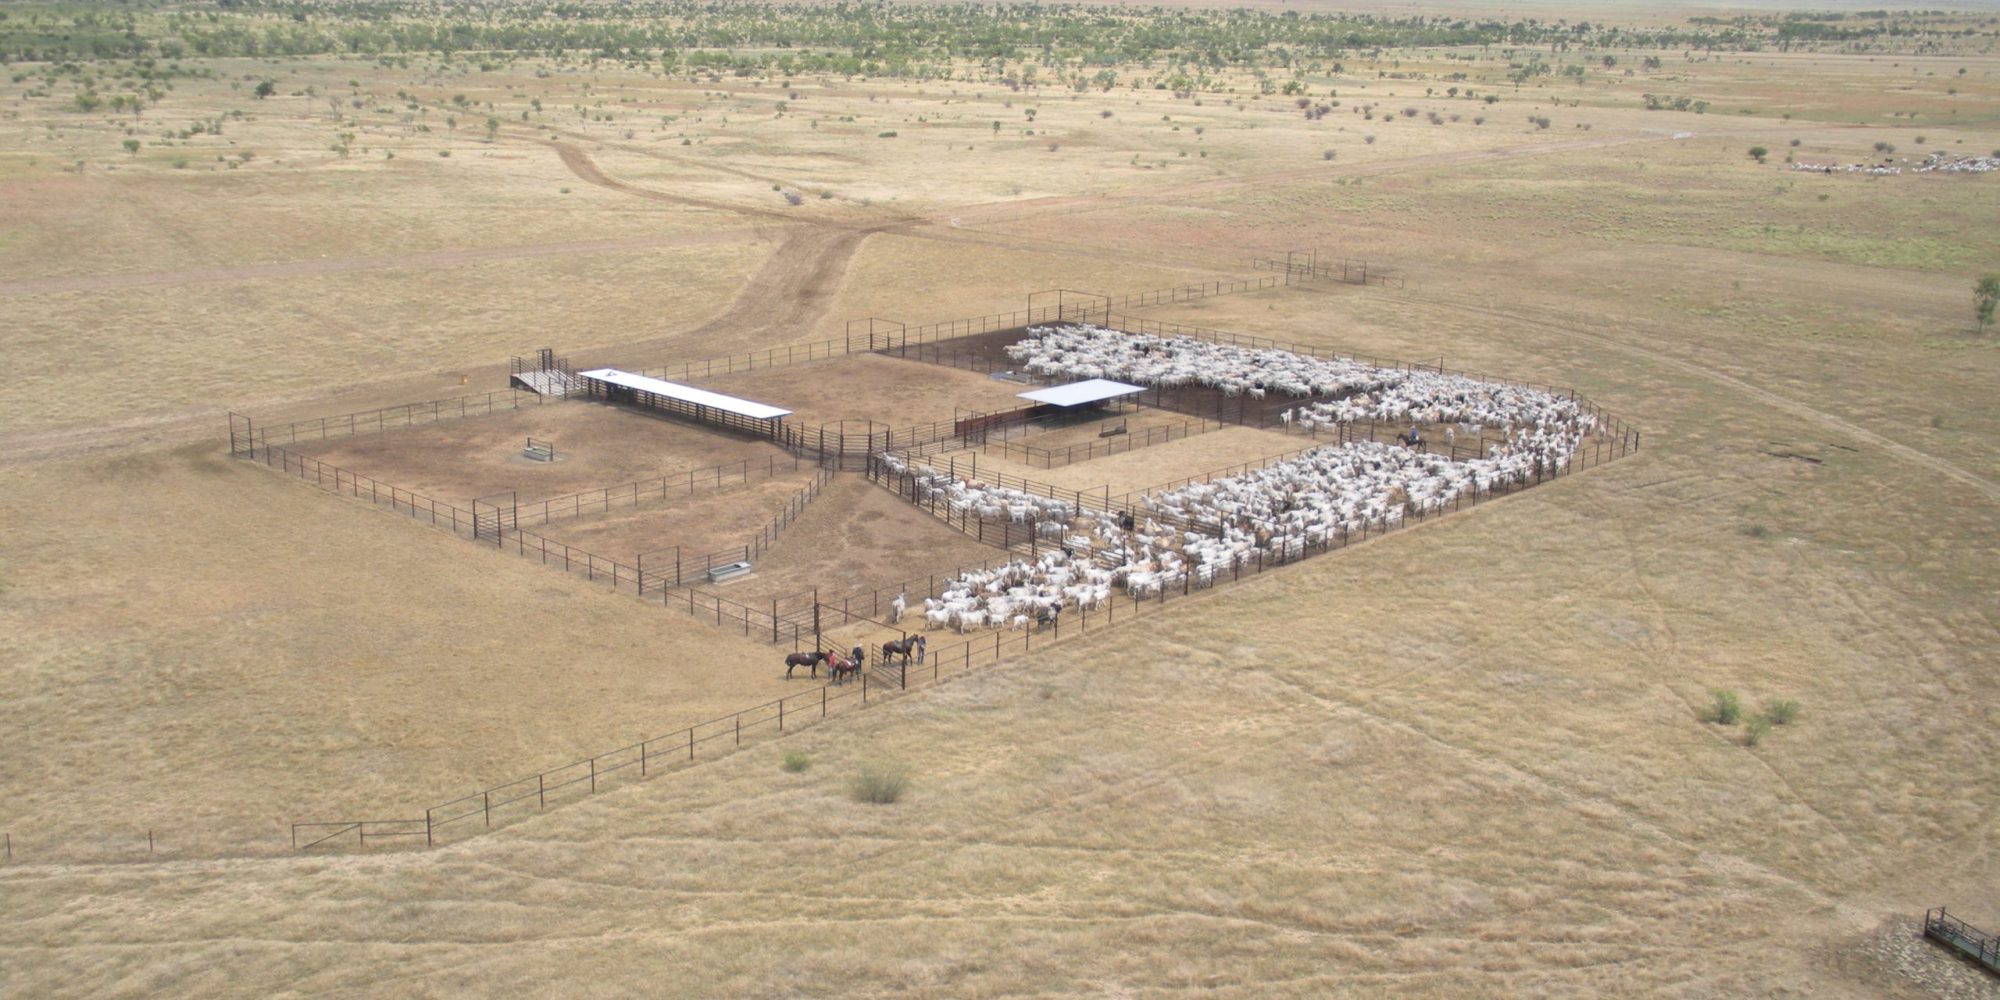 4 Cattle yarded at Morstone